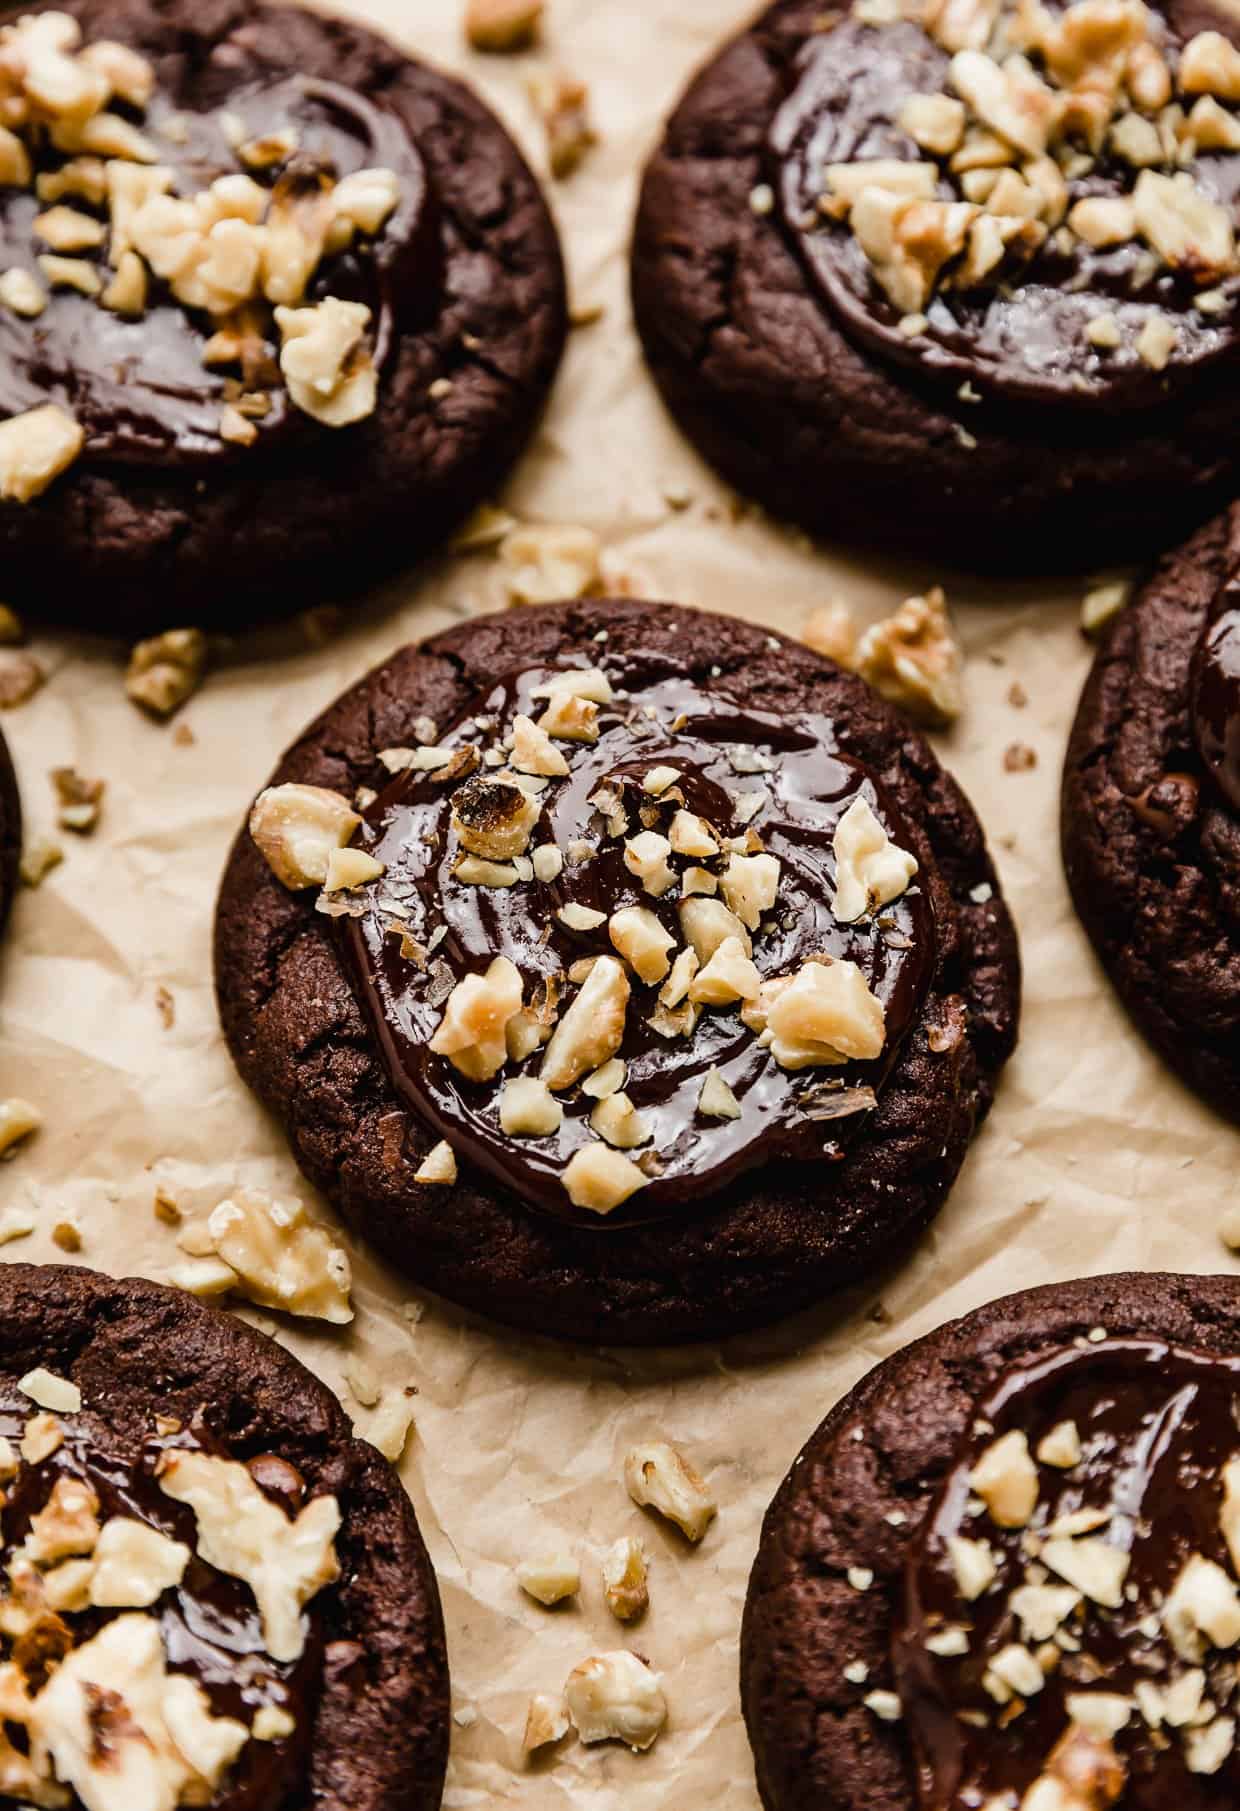 A chocolate brownie cookie topped with a melted chocolate ganache and chopped walnuts.